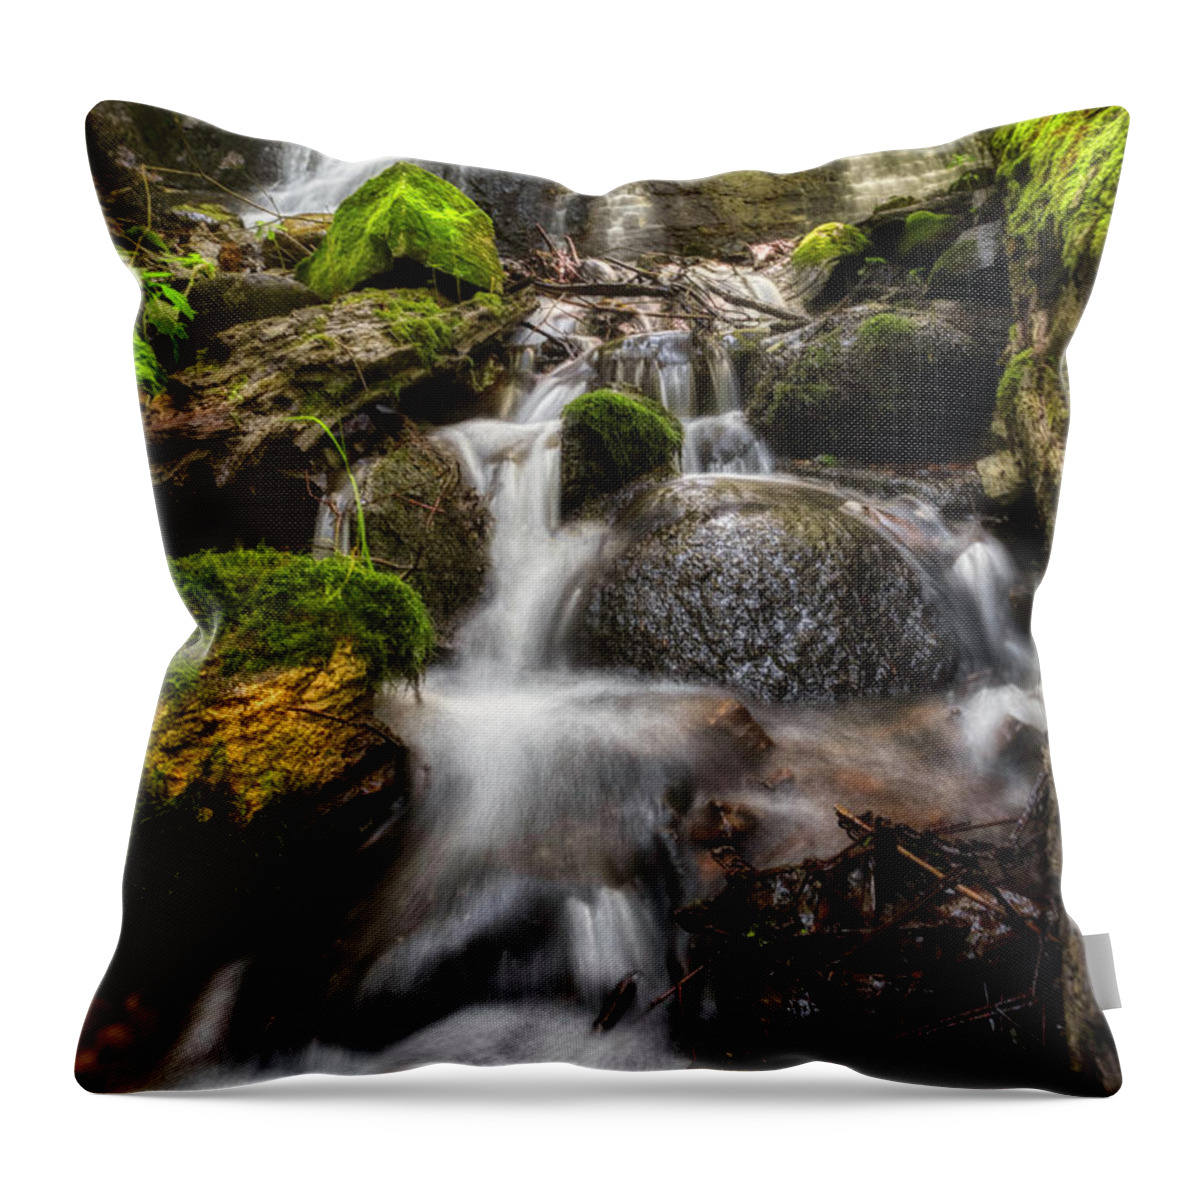 Any Vision Throw Pillow featuring the photograph Storybrook Falls by Bill Frische